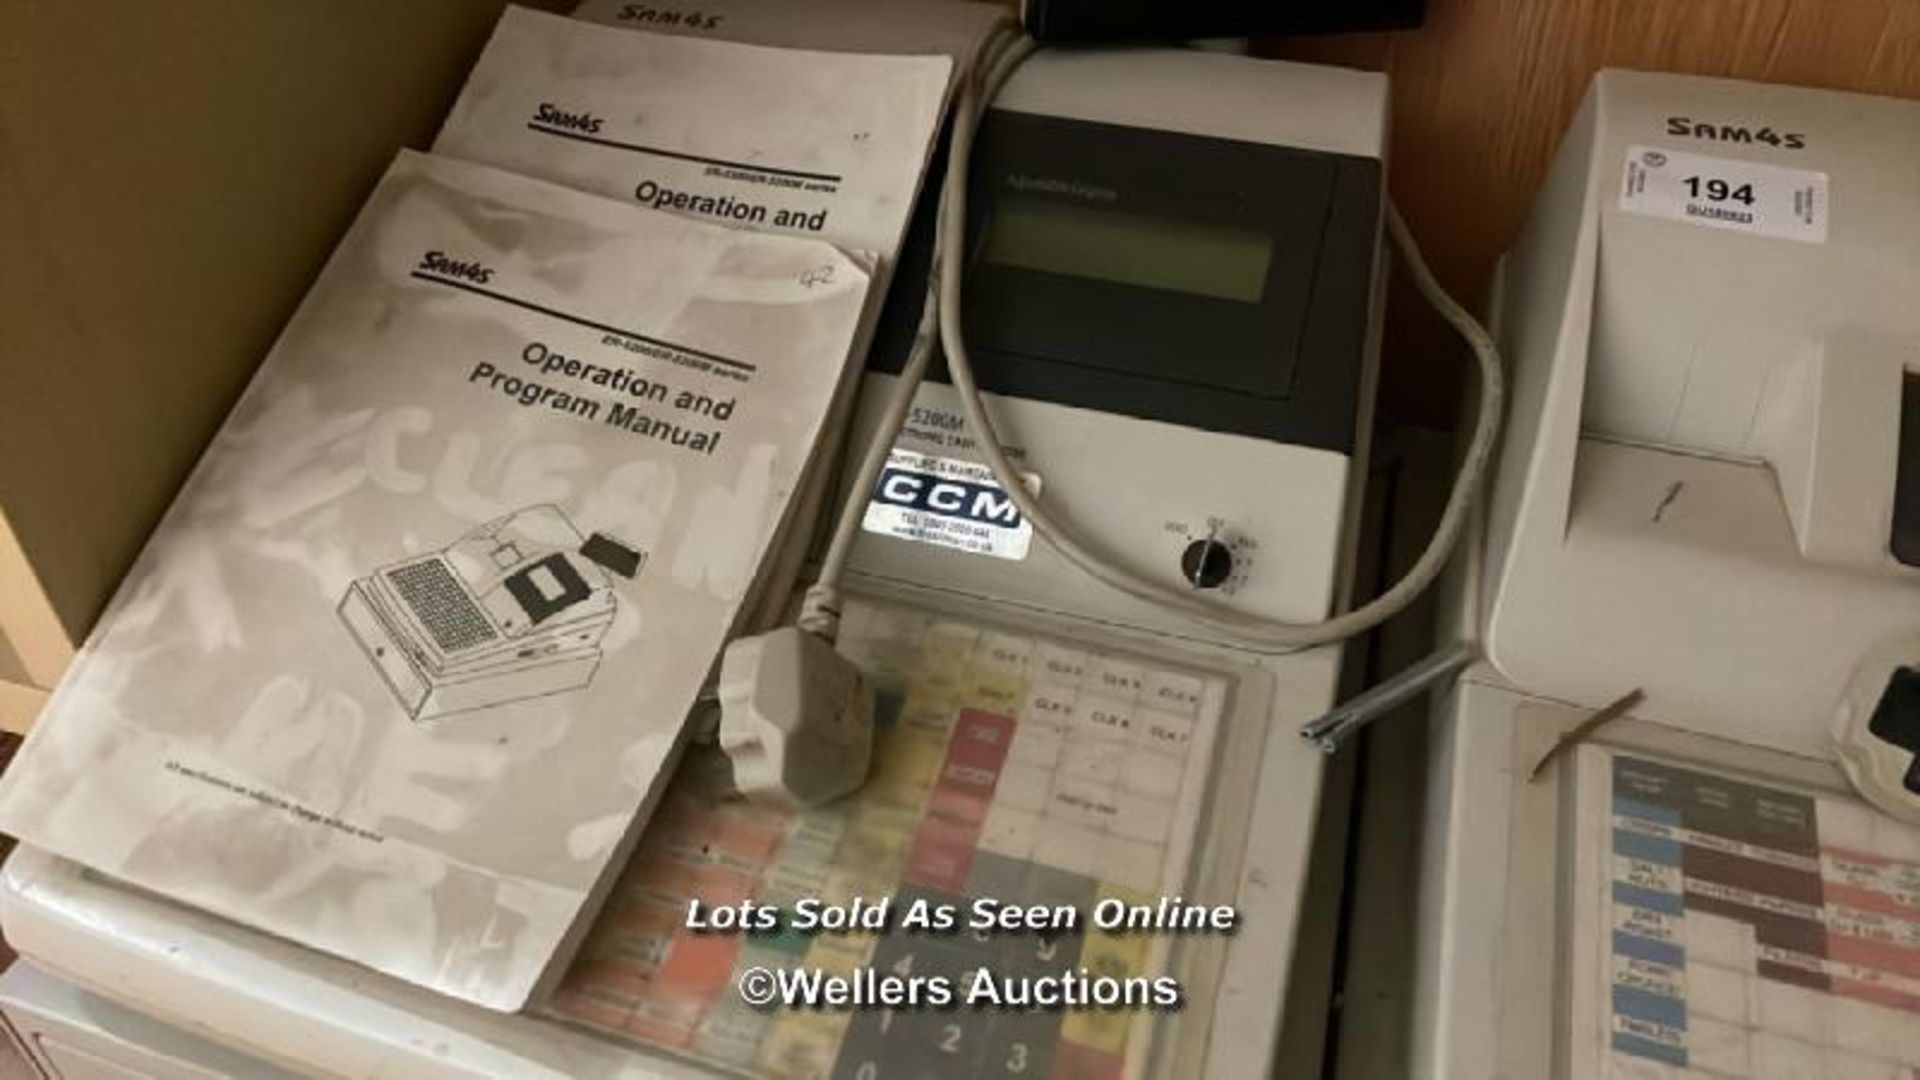 2X SAM4S ER-5200M ELECTRONIC CASH REGISTERS WITH KEYS / COLLECTION LOCATION: OLD WOKING DISTRICT - Image 3 of 3